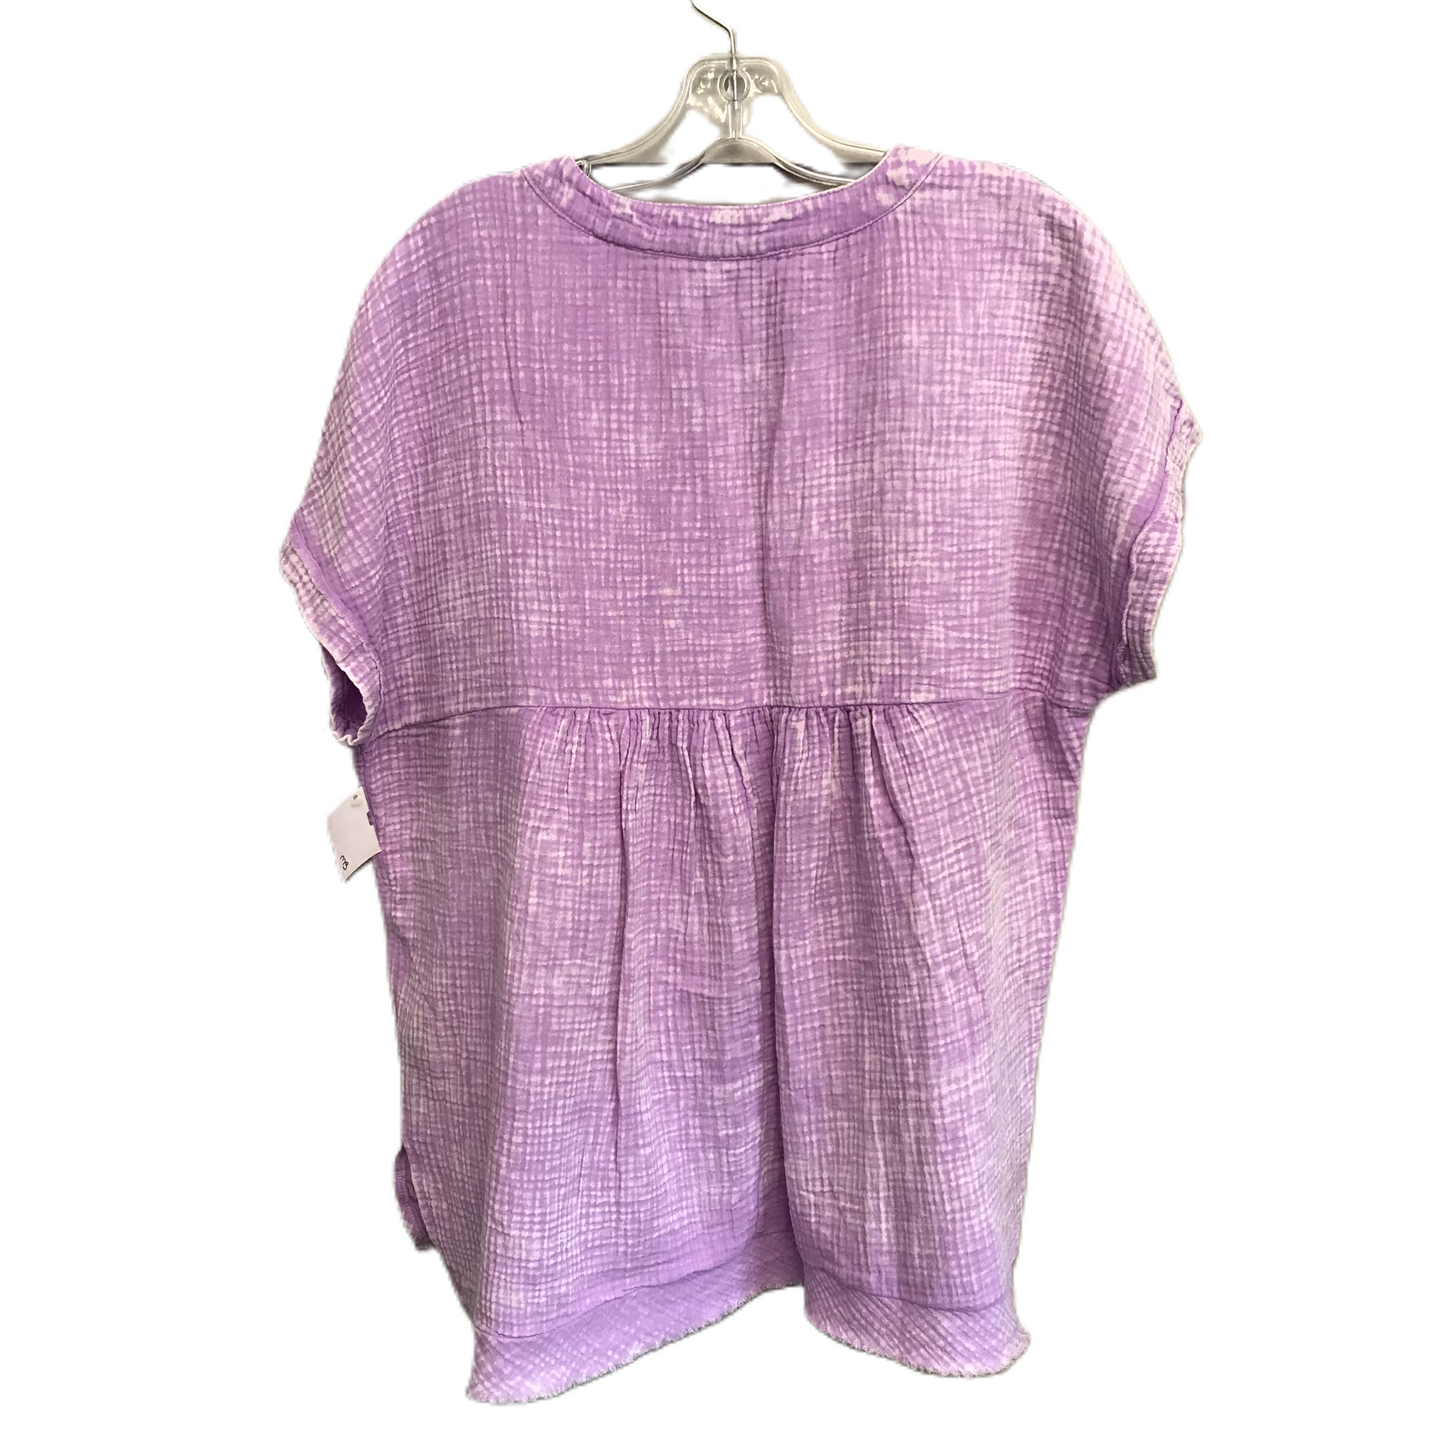 Purple Top Short Sleeve By Zenana Outfitters, Size: L